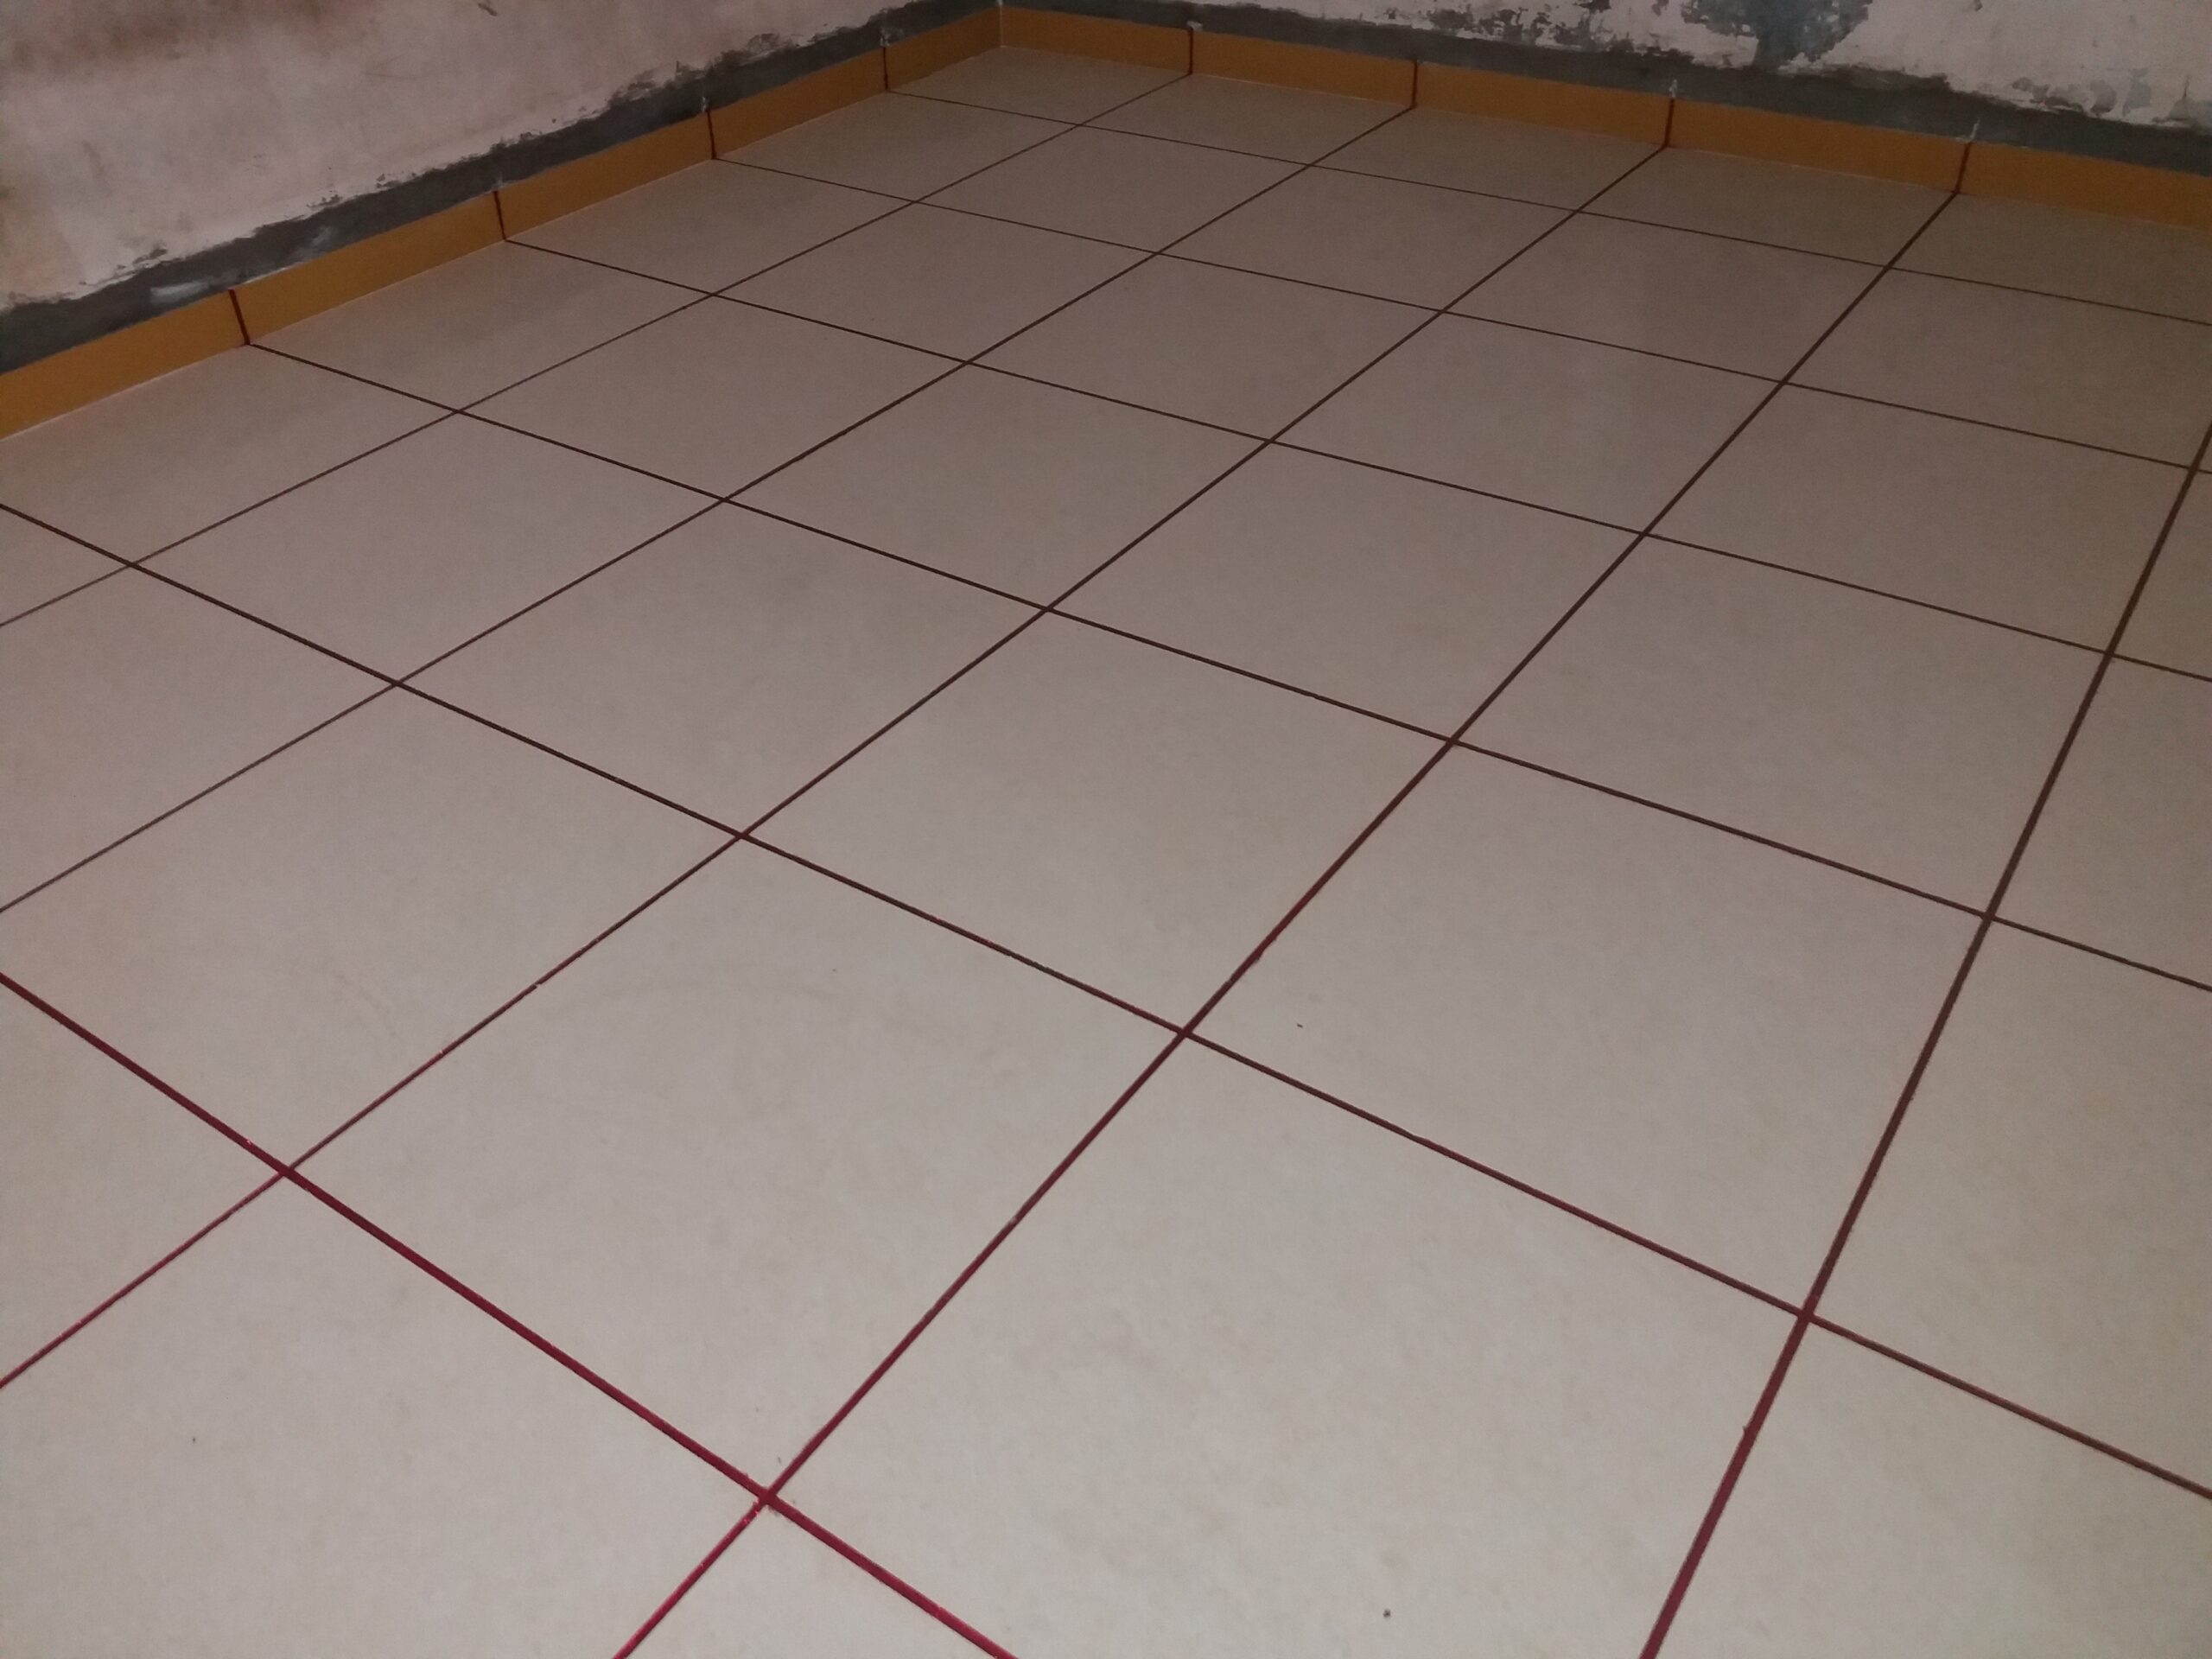 Will Epoxy Grout Fix Loose Tiles?